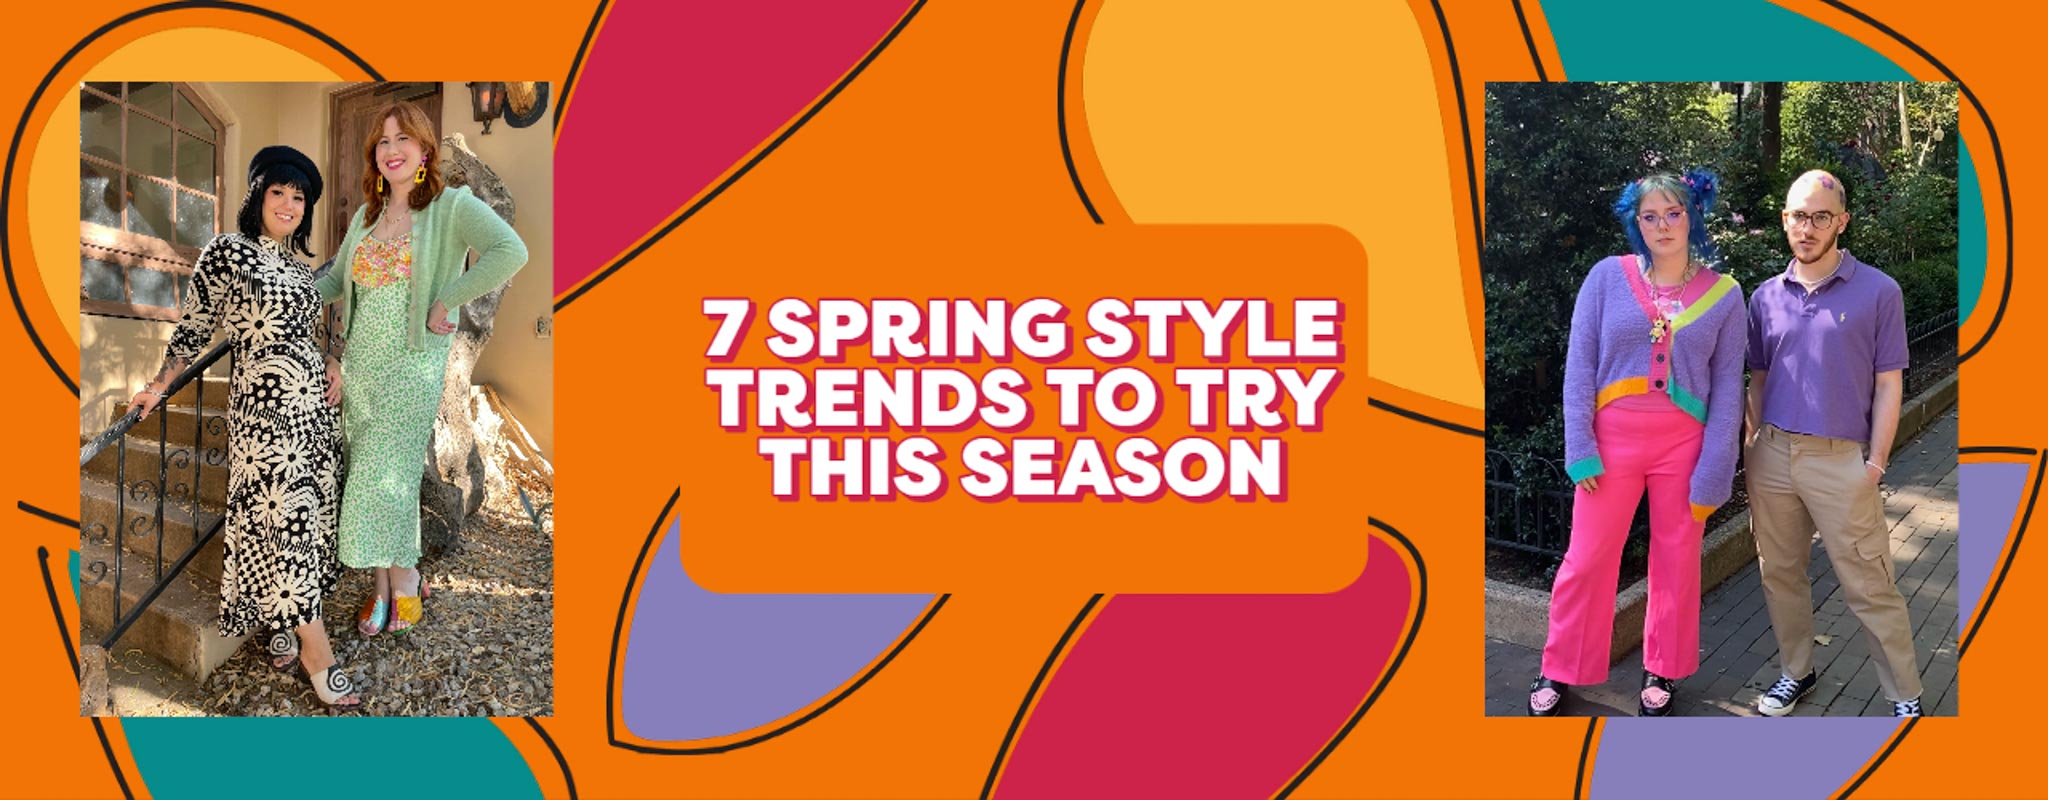 Colorful abstract graphic background, left side photo of 2 women wearing vintage style floral dresses, the center reads 7 Spring style trends to try this season and to the right a photo of two people wearing colorful clothing